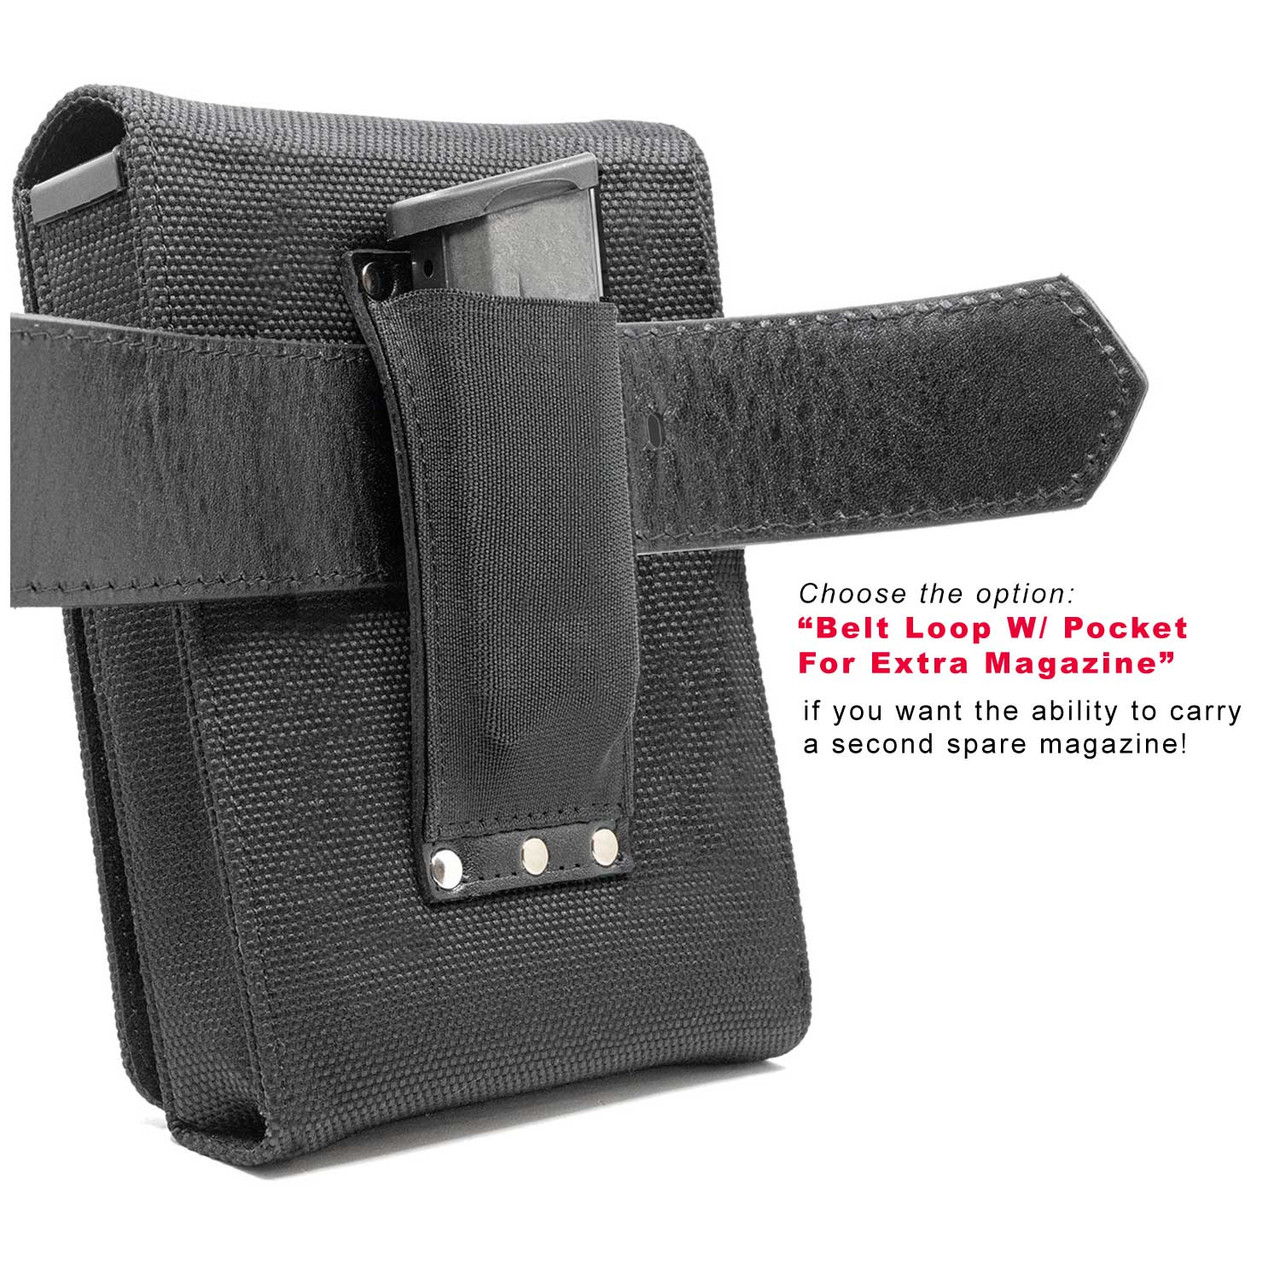 The Kahr K9 Xtra Mag Black Leather Holster